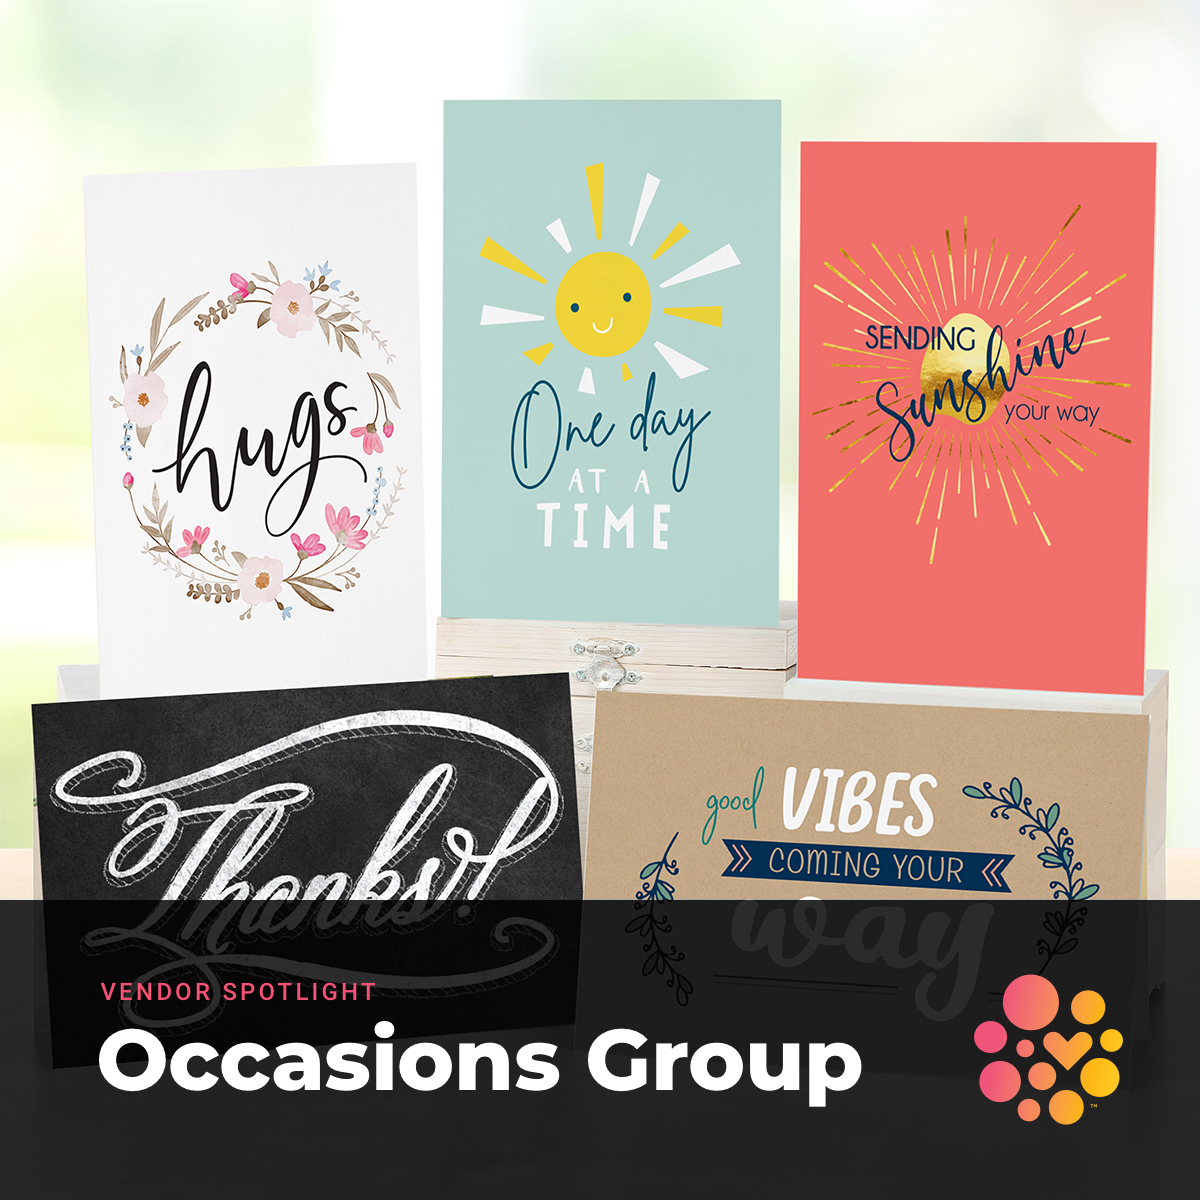 My PowerPak is proud to feature handwritten and mailed greeting cards from The Occasions Group in our Marketplace! They create quality greeting cards and journals which always find just the right message! mypowerpak.com/download or #AppStore
#Caregiving 
#SendACard
@TaylorCorp